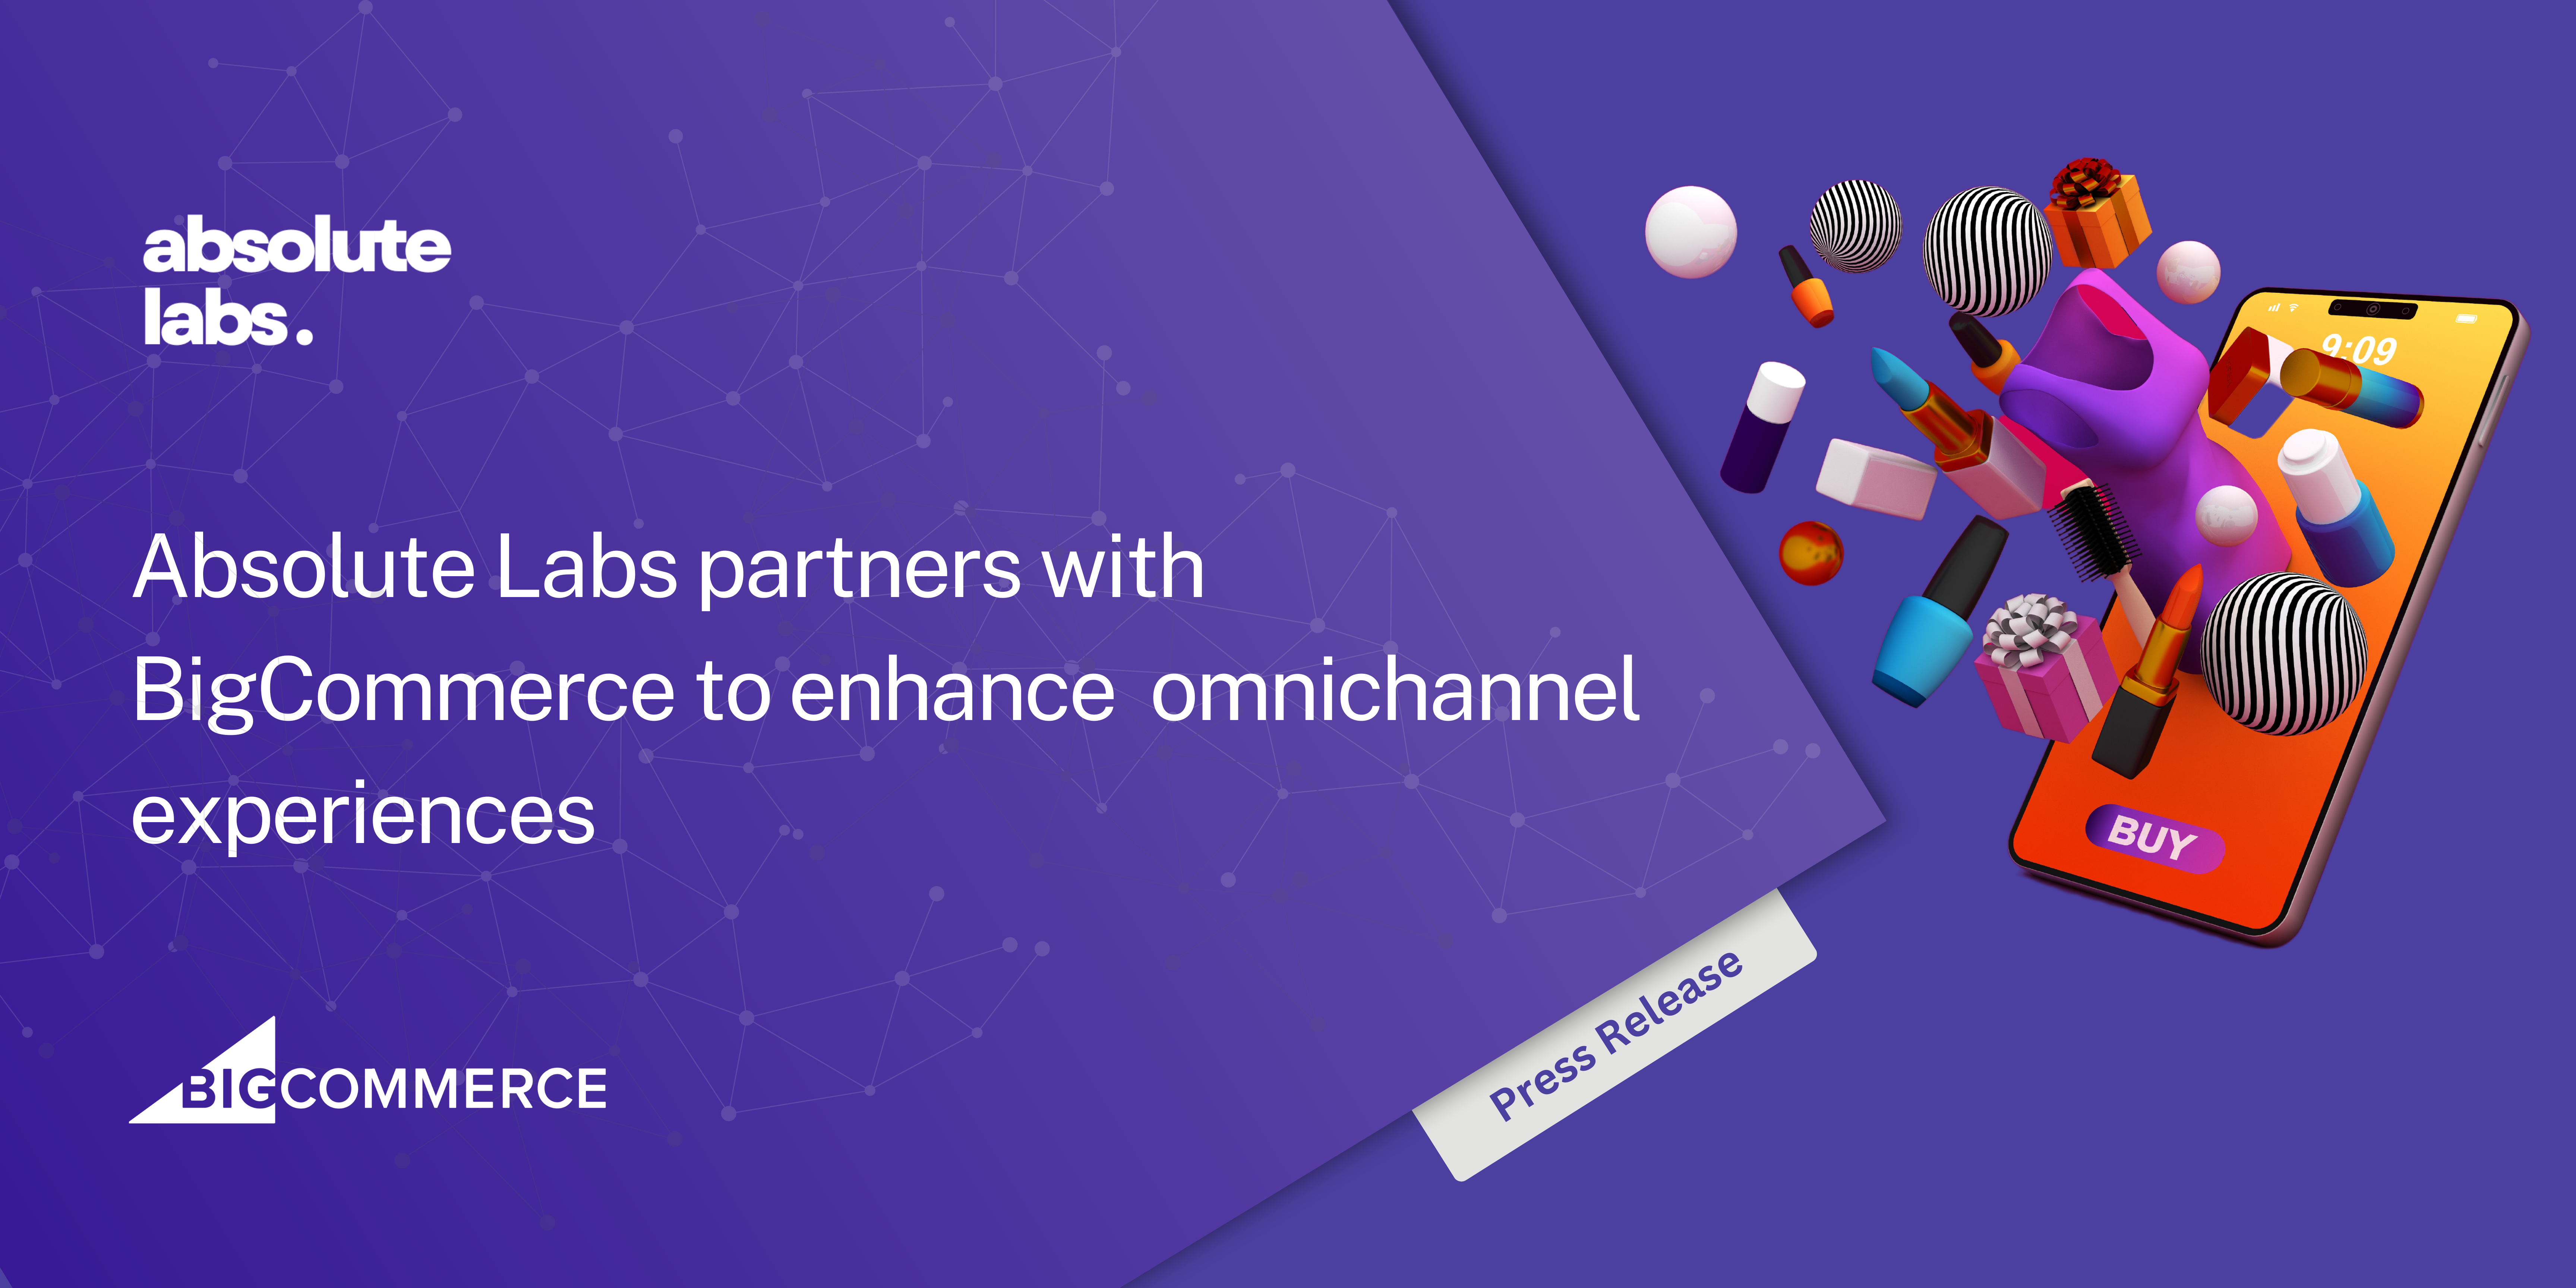 Absolute Labs partners with BigCommerce to enhance omnichannel experiences